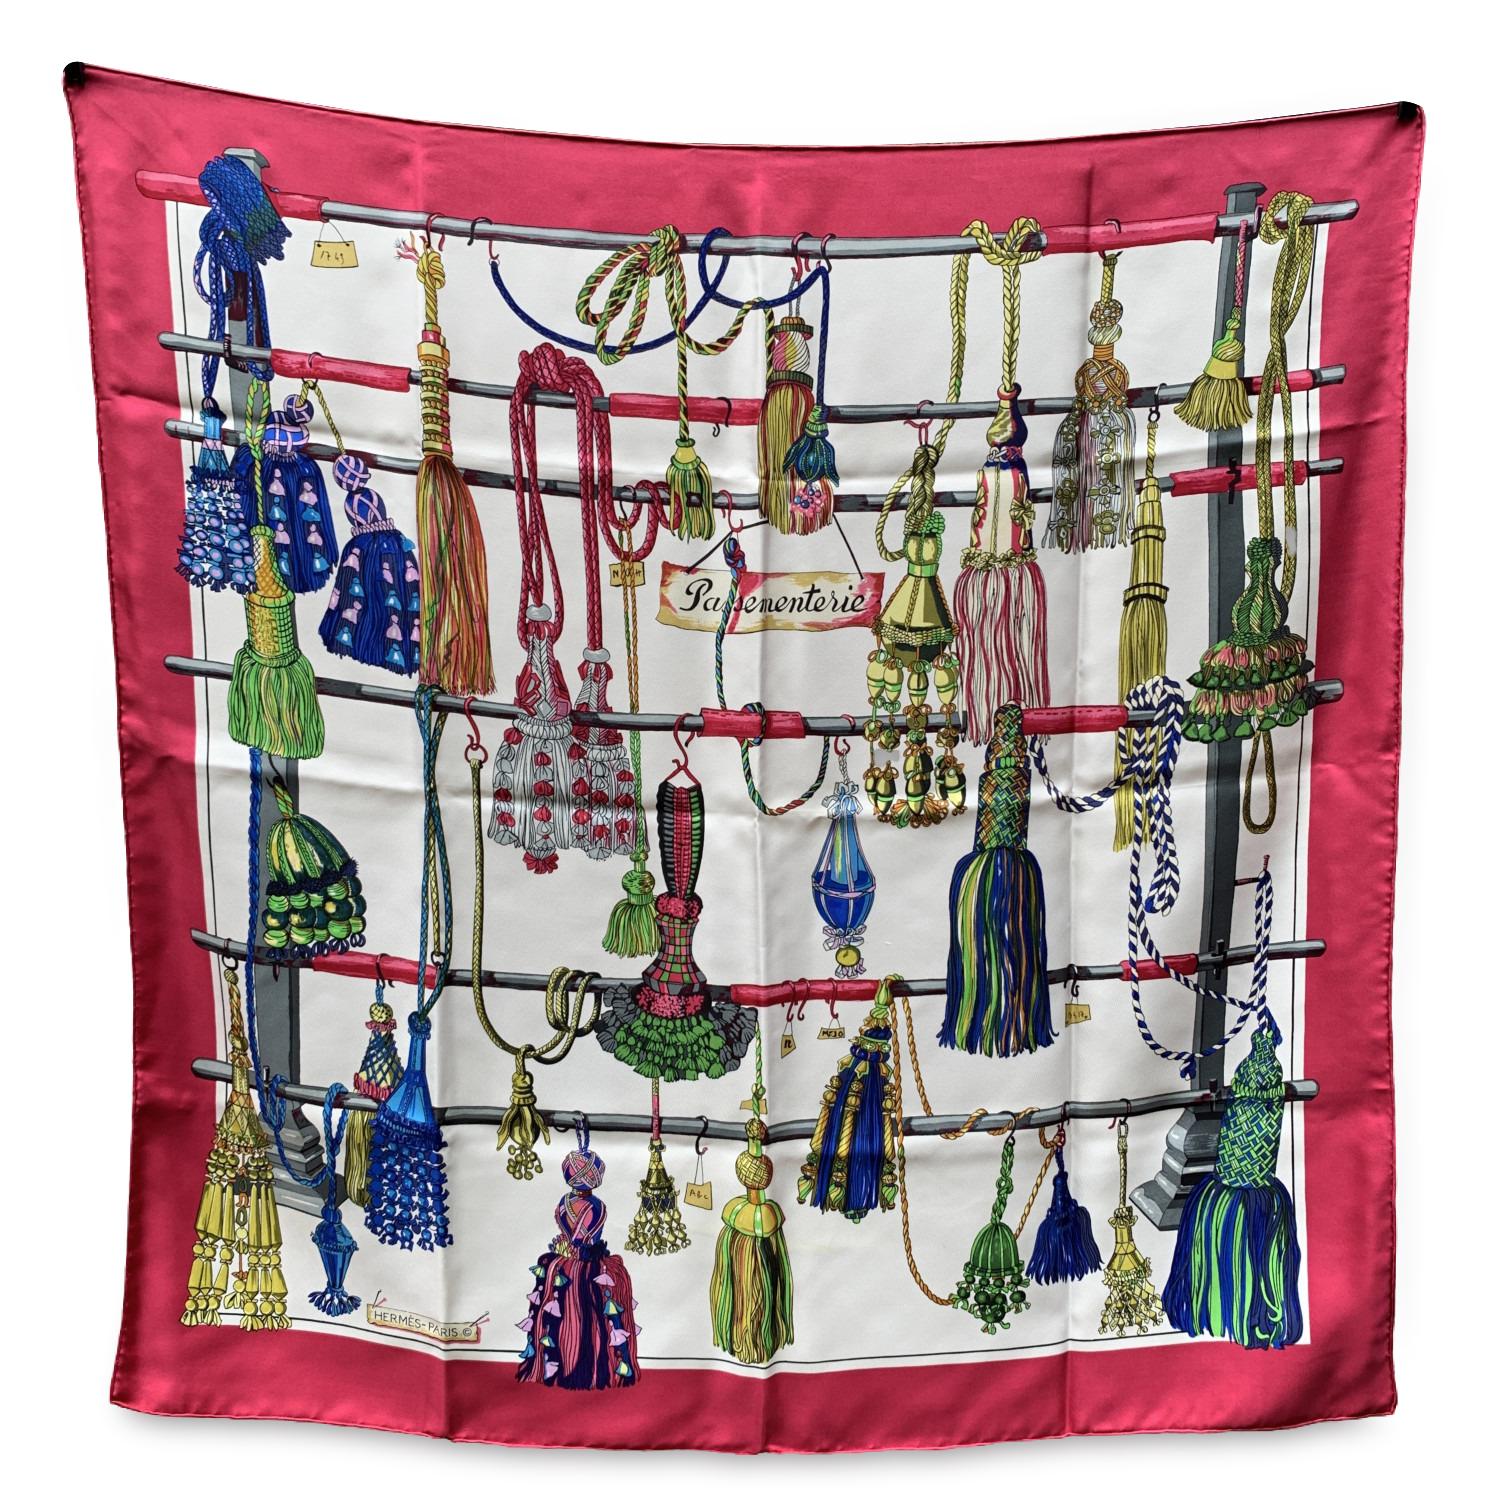 Vintage HERMES scarf 'Passementerie' was designed by Francoise Heron and first issued in 1960. Multicolor tassels design with magenta borders. The 'HERMES Paris' signature with copyright symbol in the lower border. 100% silk. Approx measurements: 35